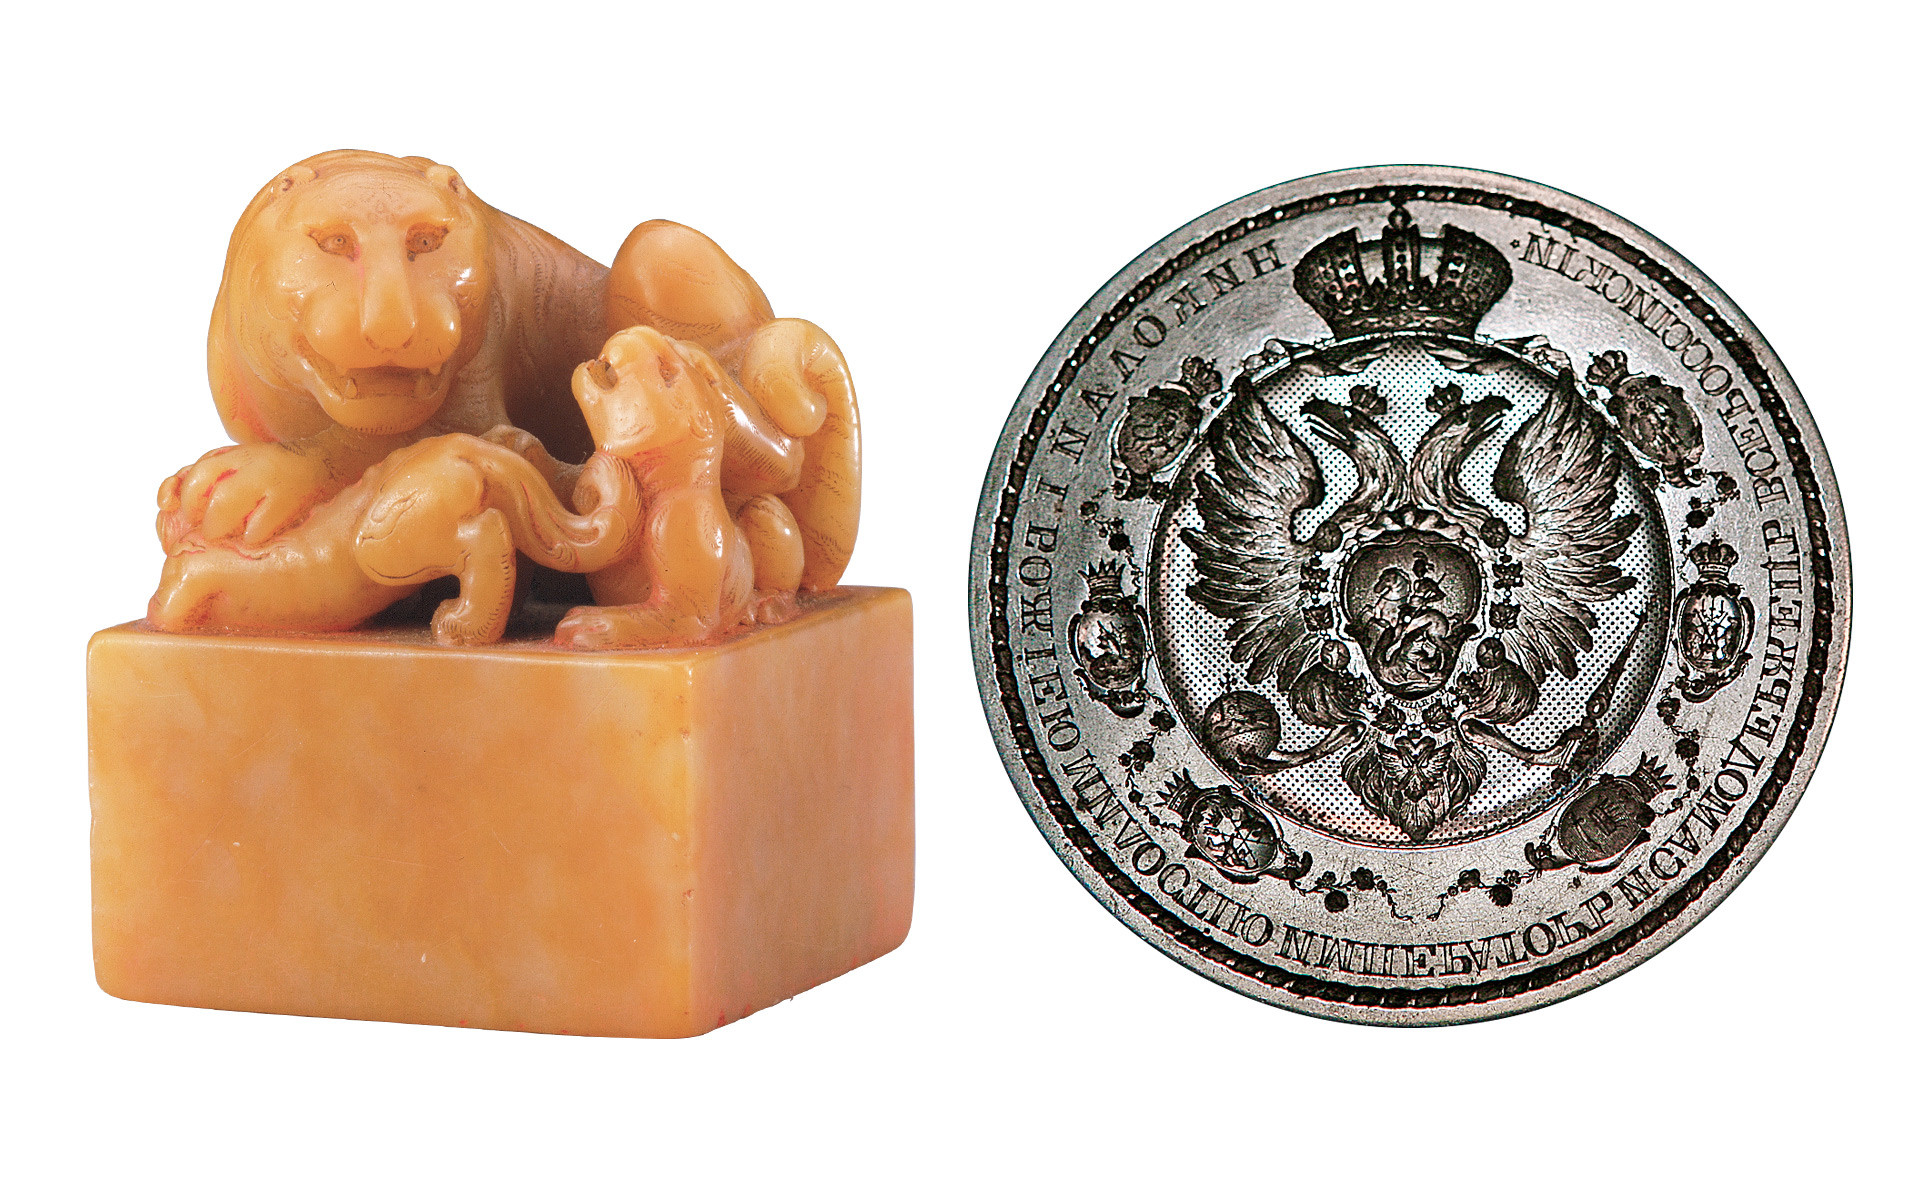 Left: Emperor's seal of the Qianlong period.
Right: State seal of Emperor Nicholas I of Russia.